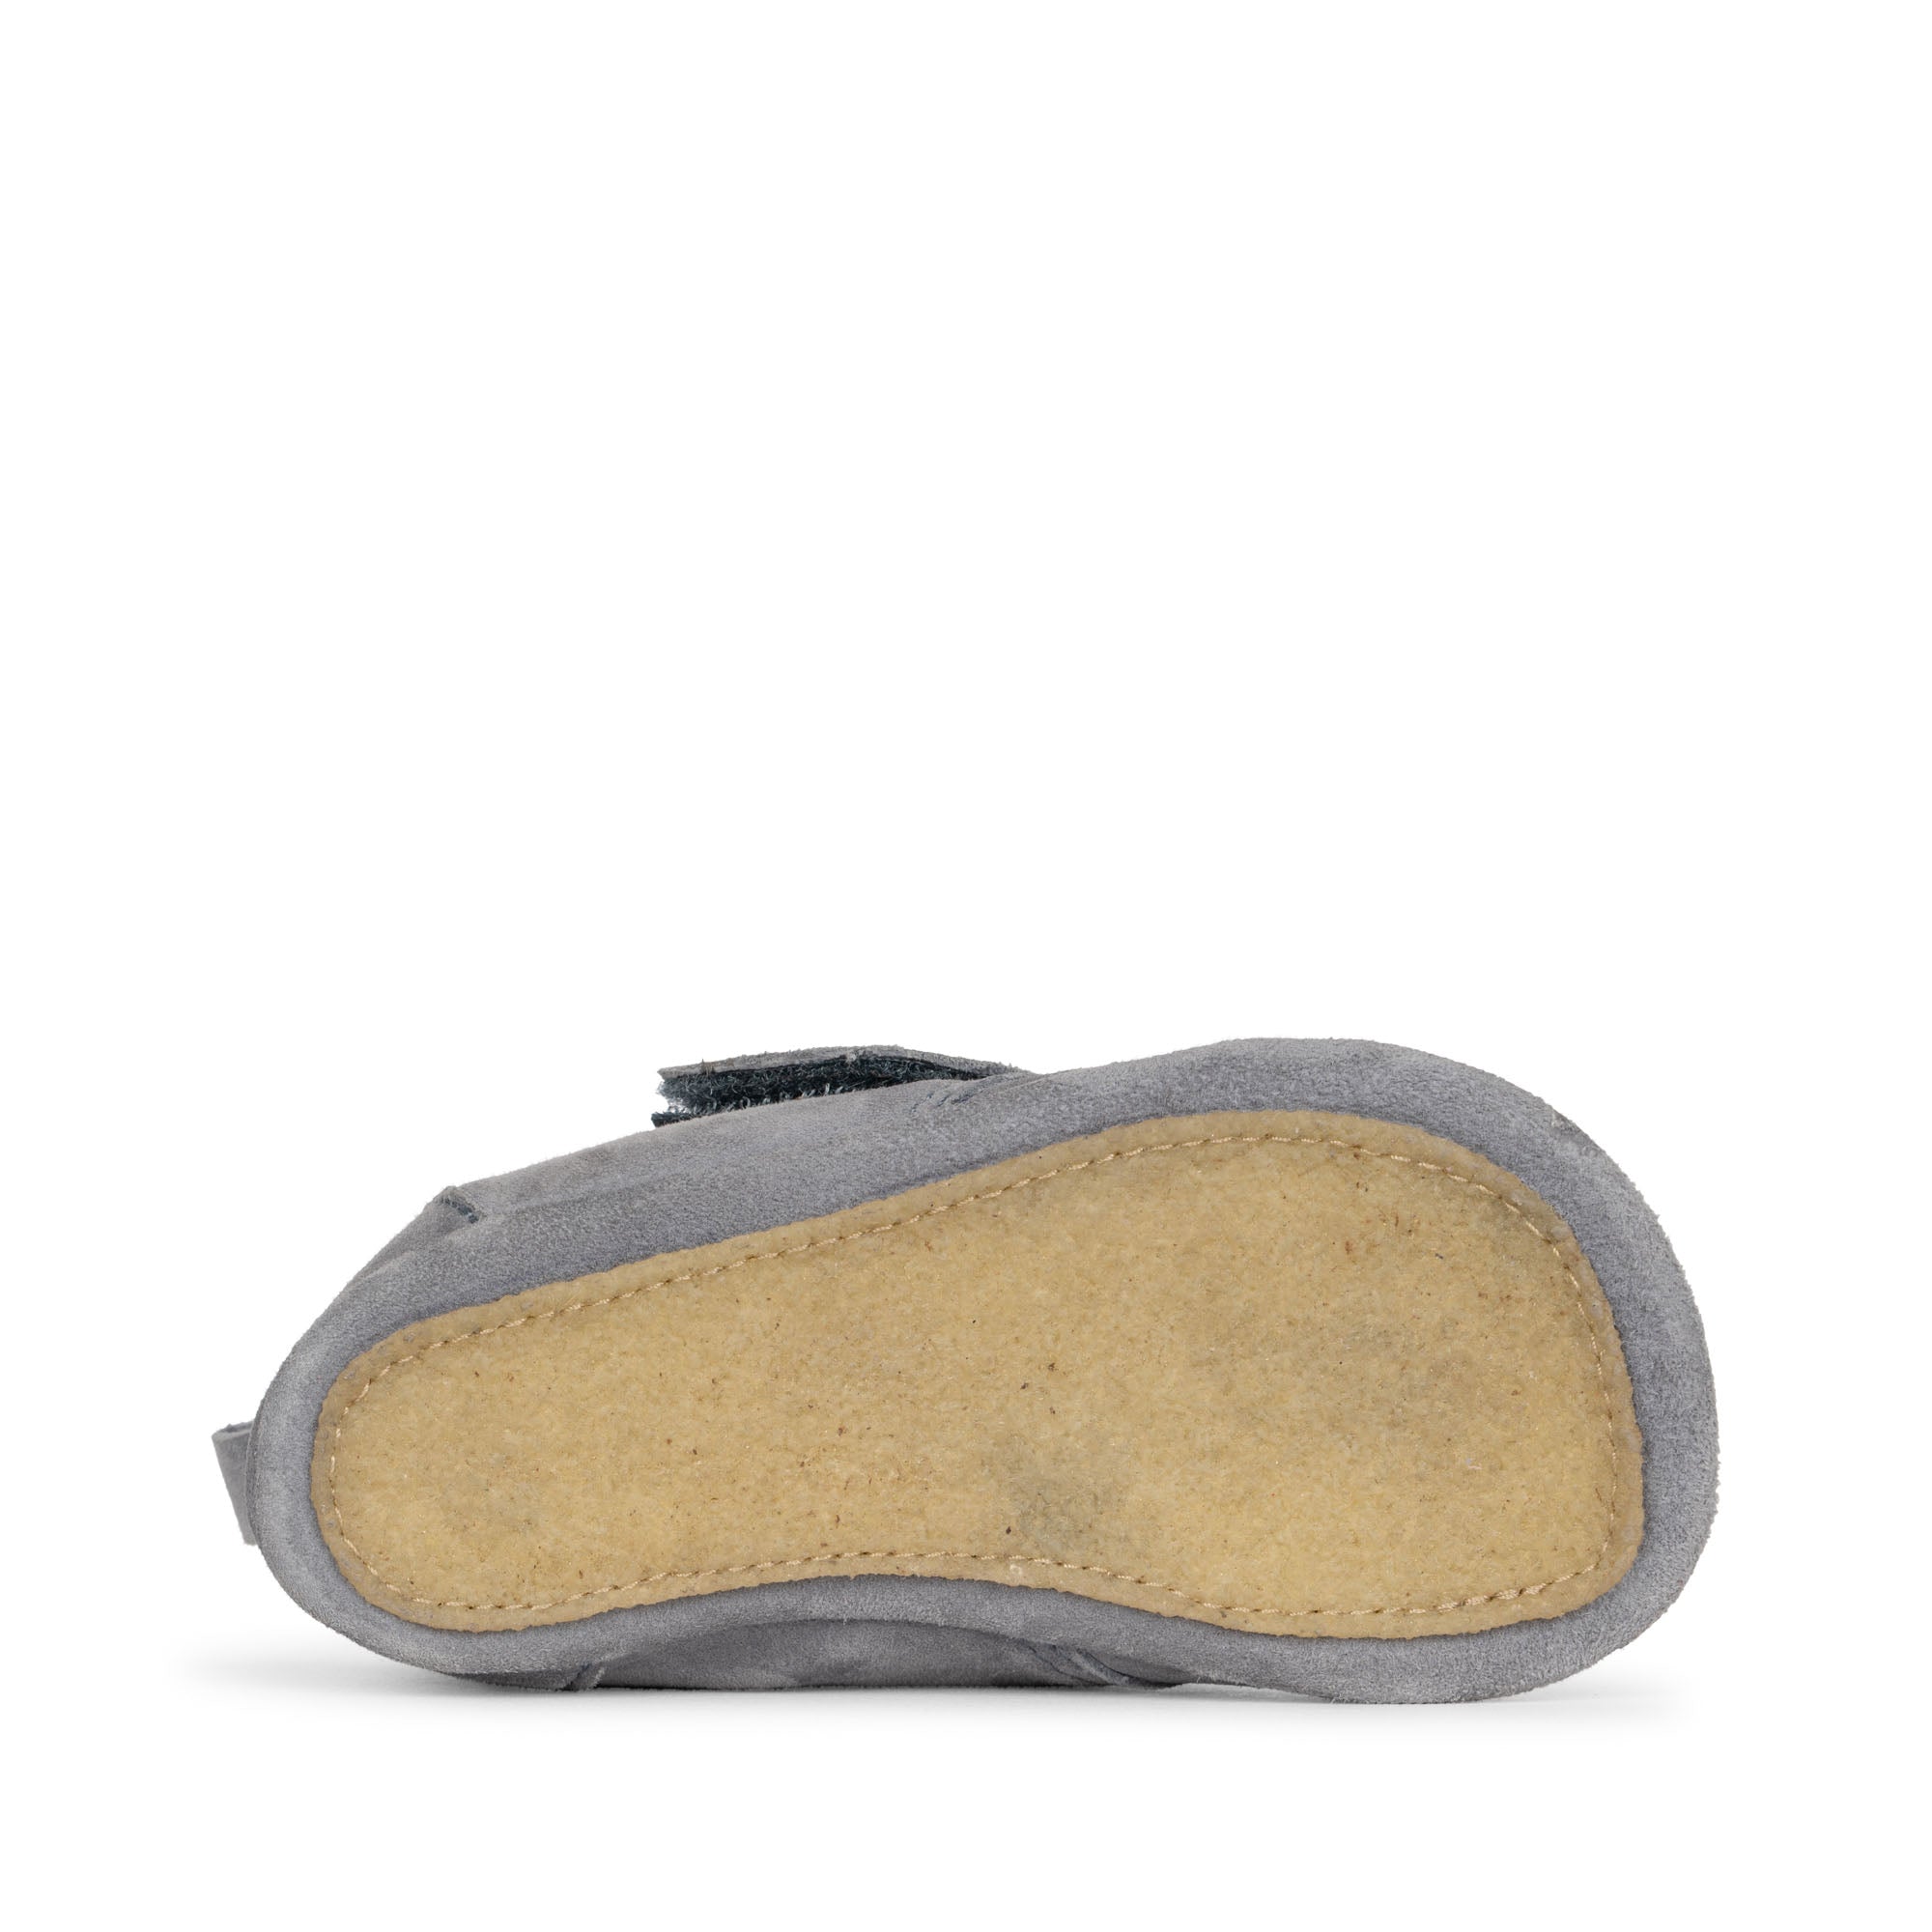 Konges Sløjd A/S Mamour Embroidered Suede Footies Pantoufles TRADEWINDS